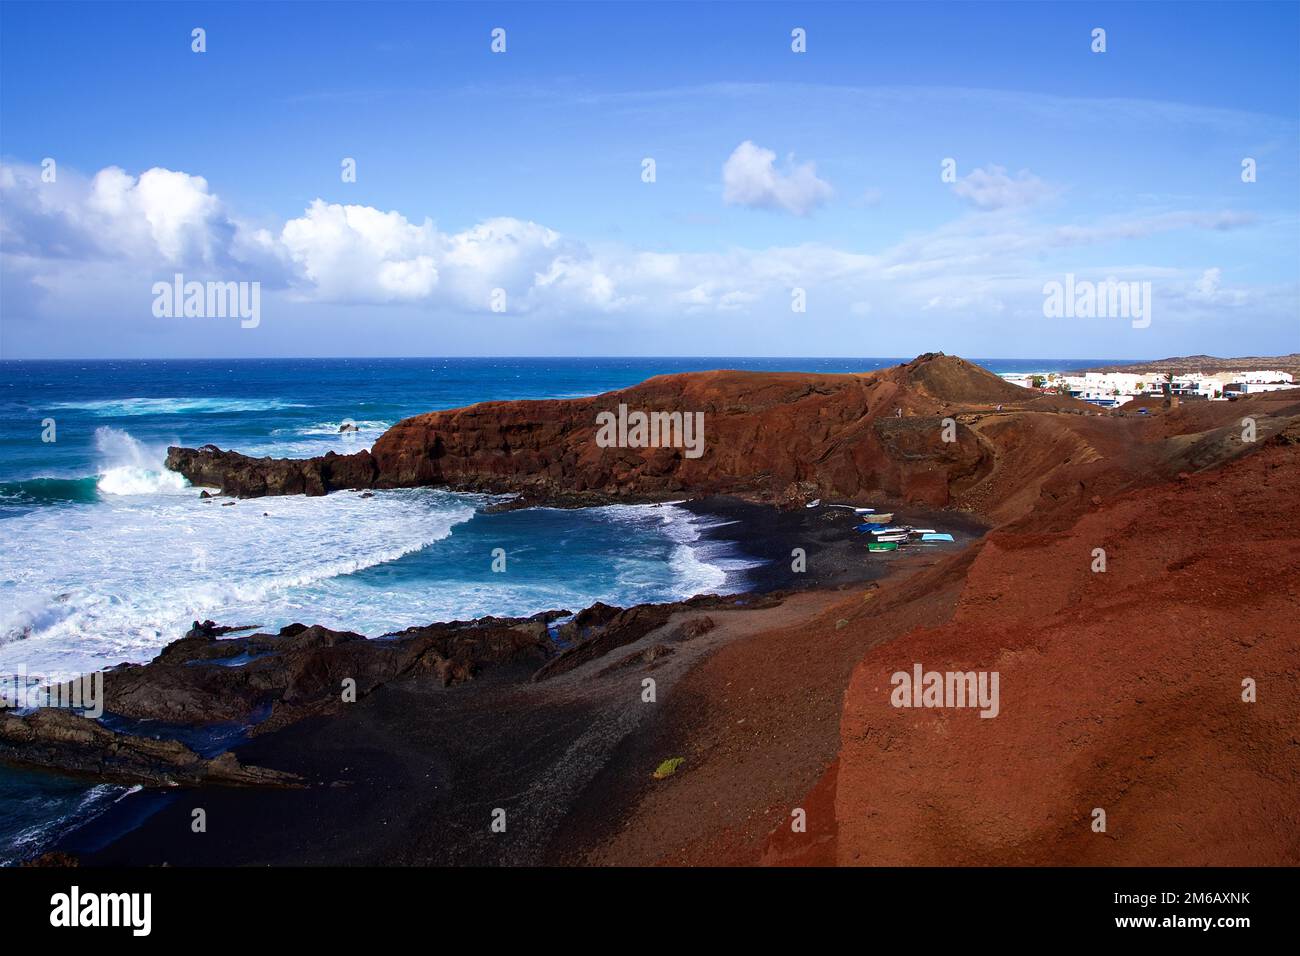 Charco de los Clicos, red lava rocks, surf, black lava beach, blue sky with white clouds, west coast, Lanzarote, Canary Islands, Spain Stock Photo